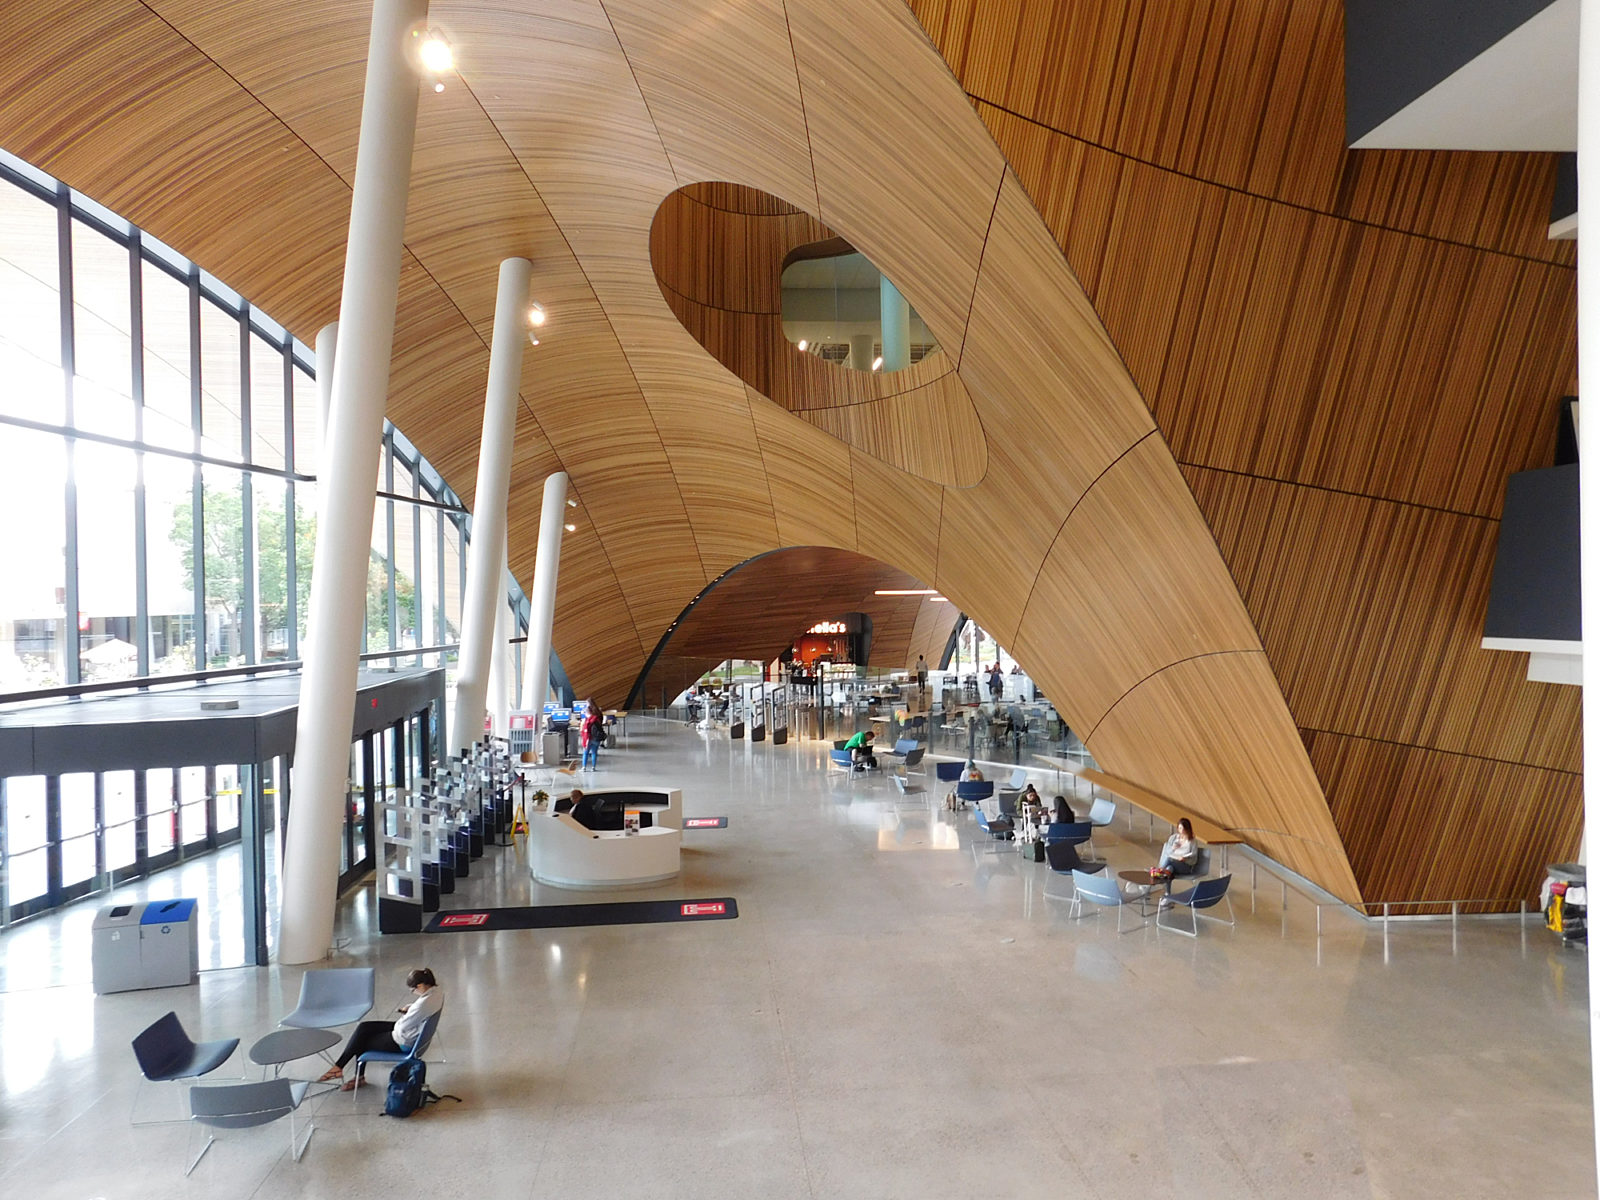 Lobby area of Temple library showing beautiful wooden architectural arches and details. High ceilings and concrete floors with some seating along walls